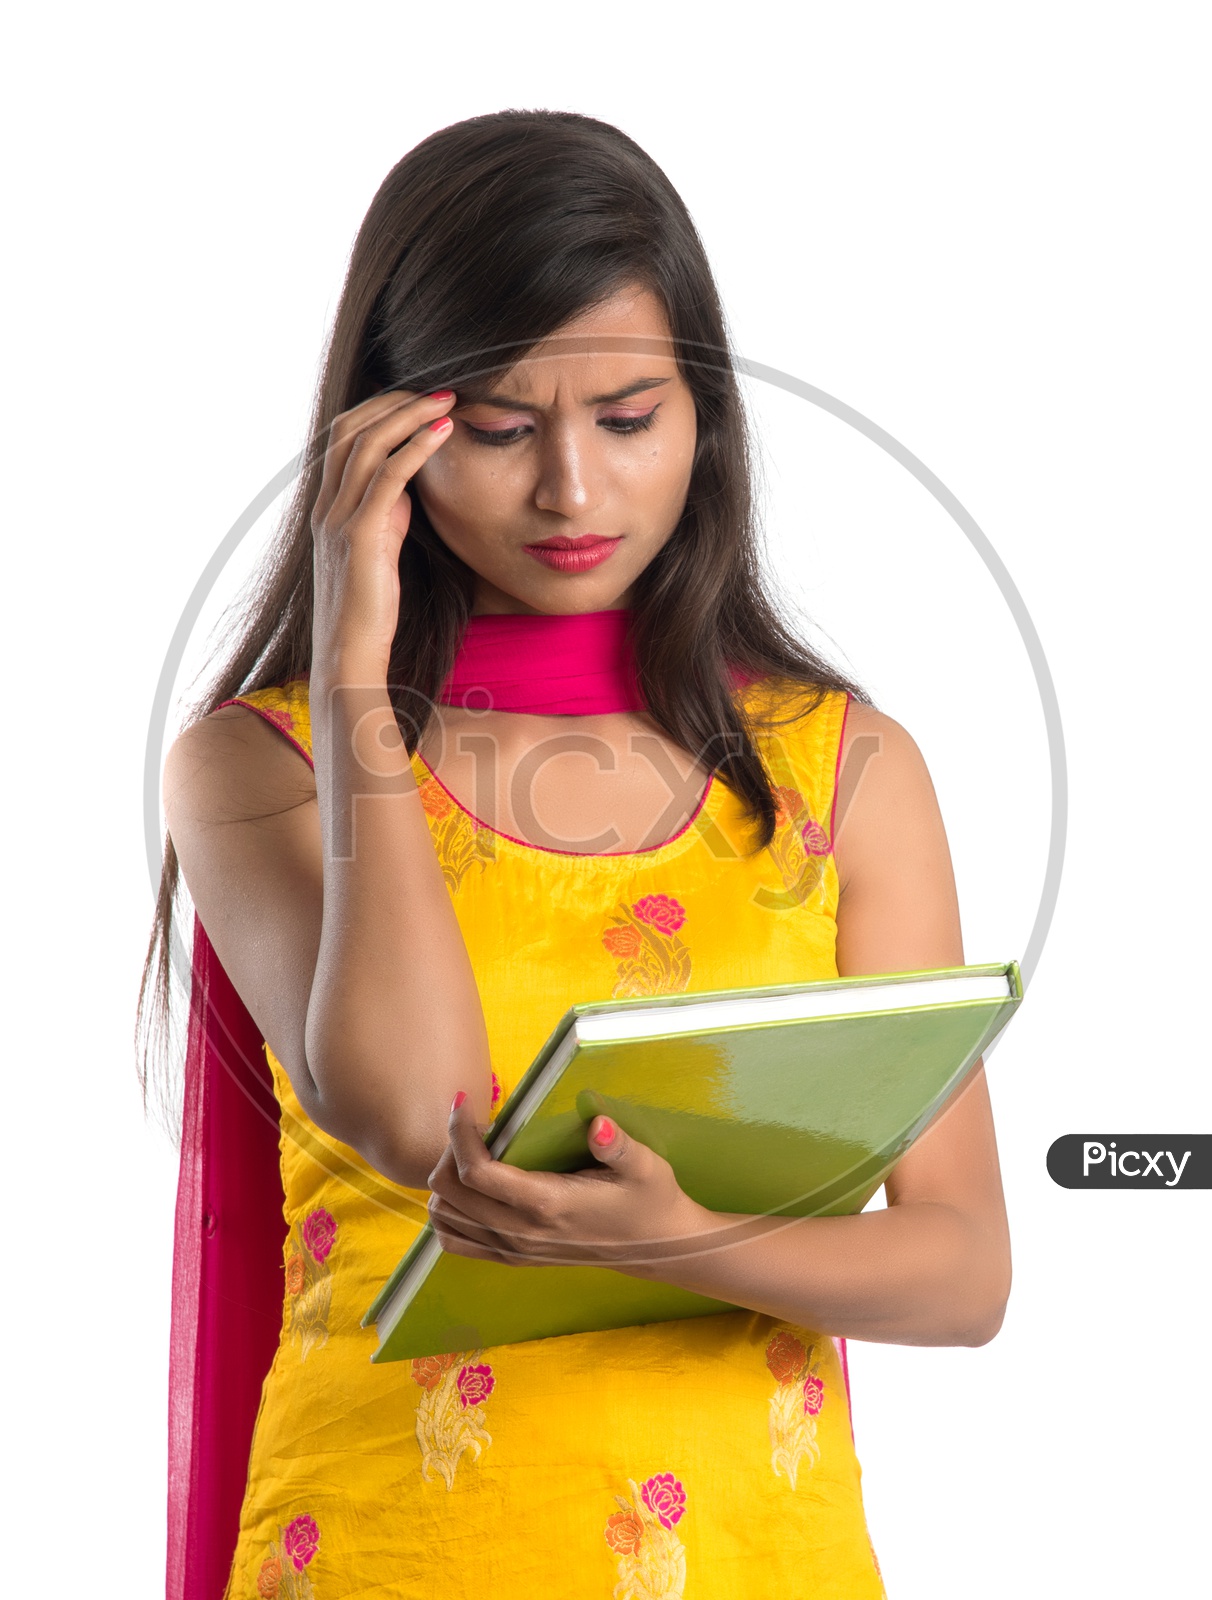 Stressed Indian Girl Student with Books on an Isolated White Background